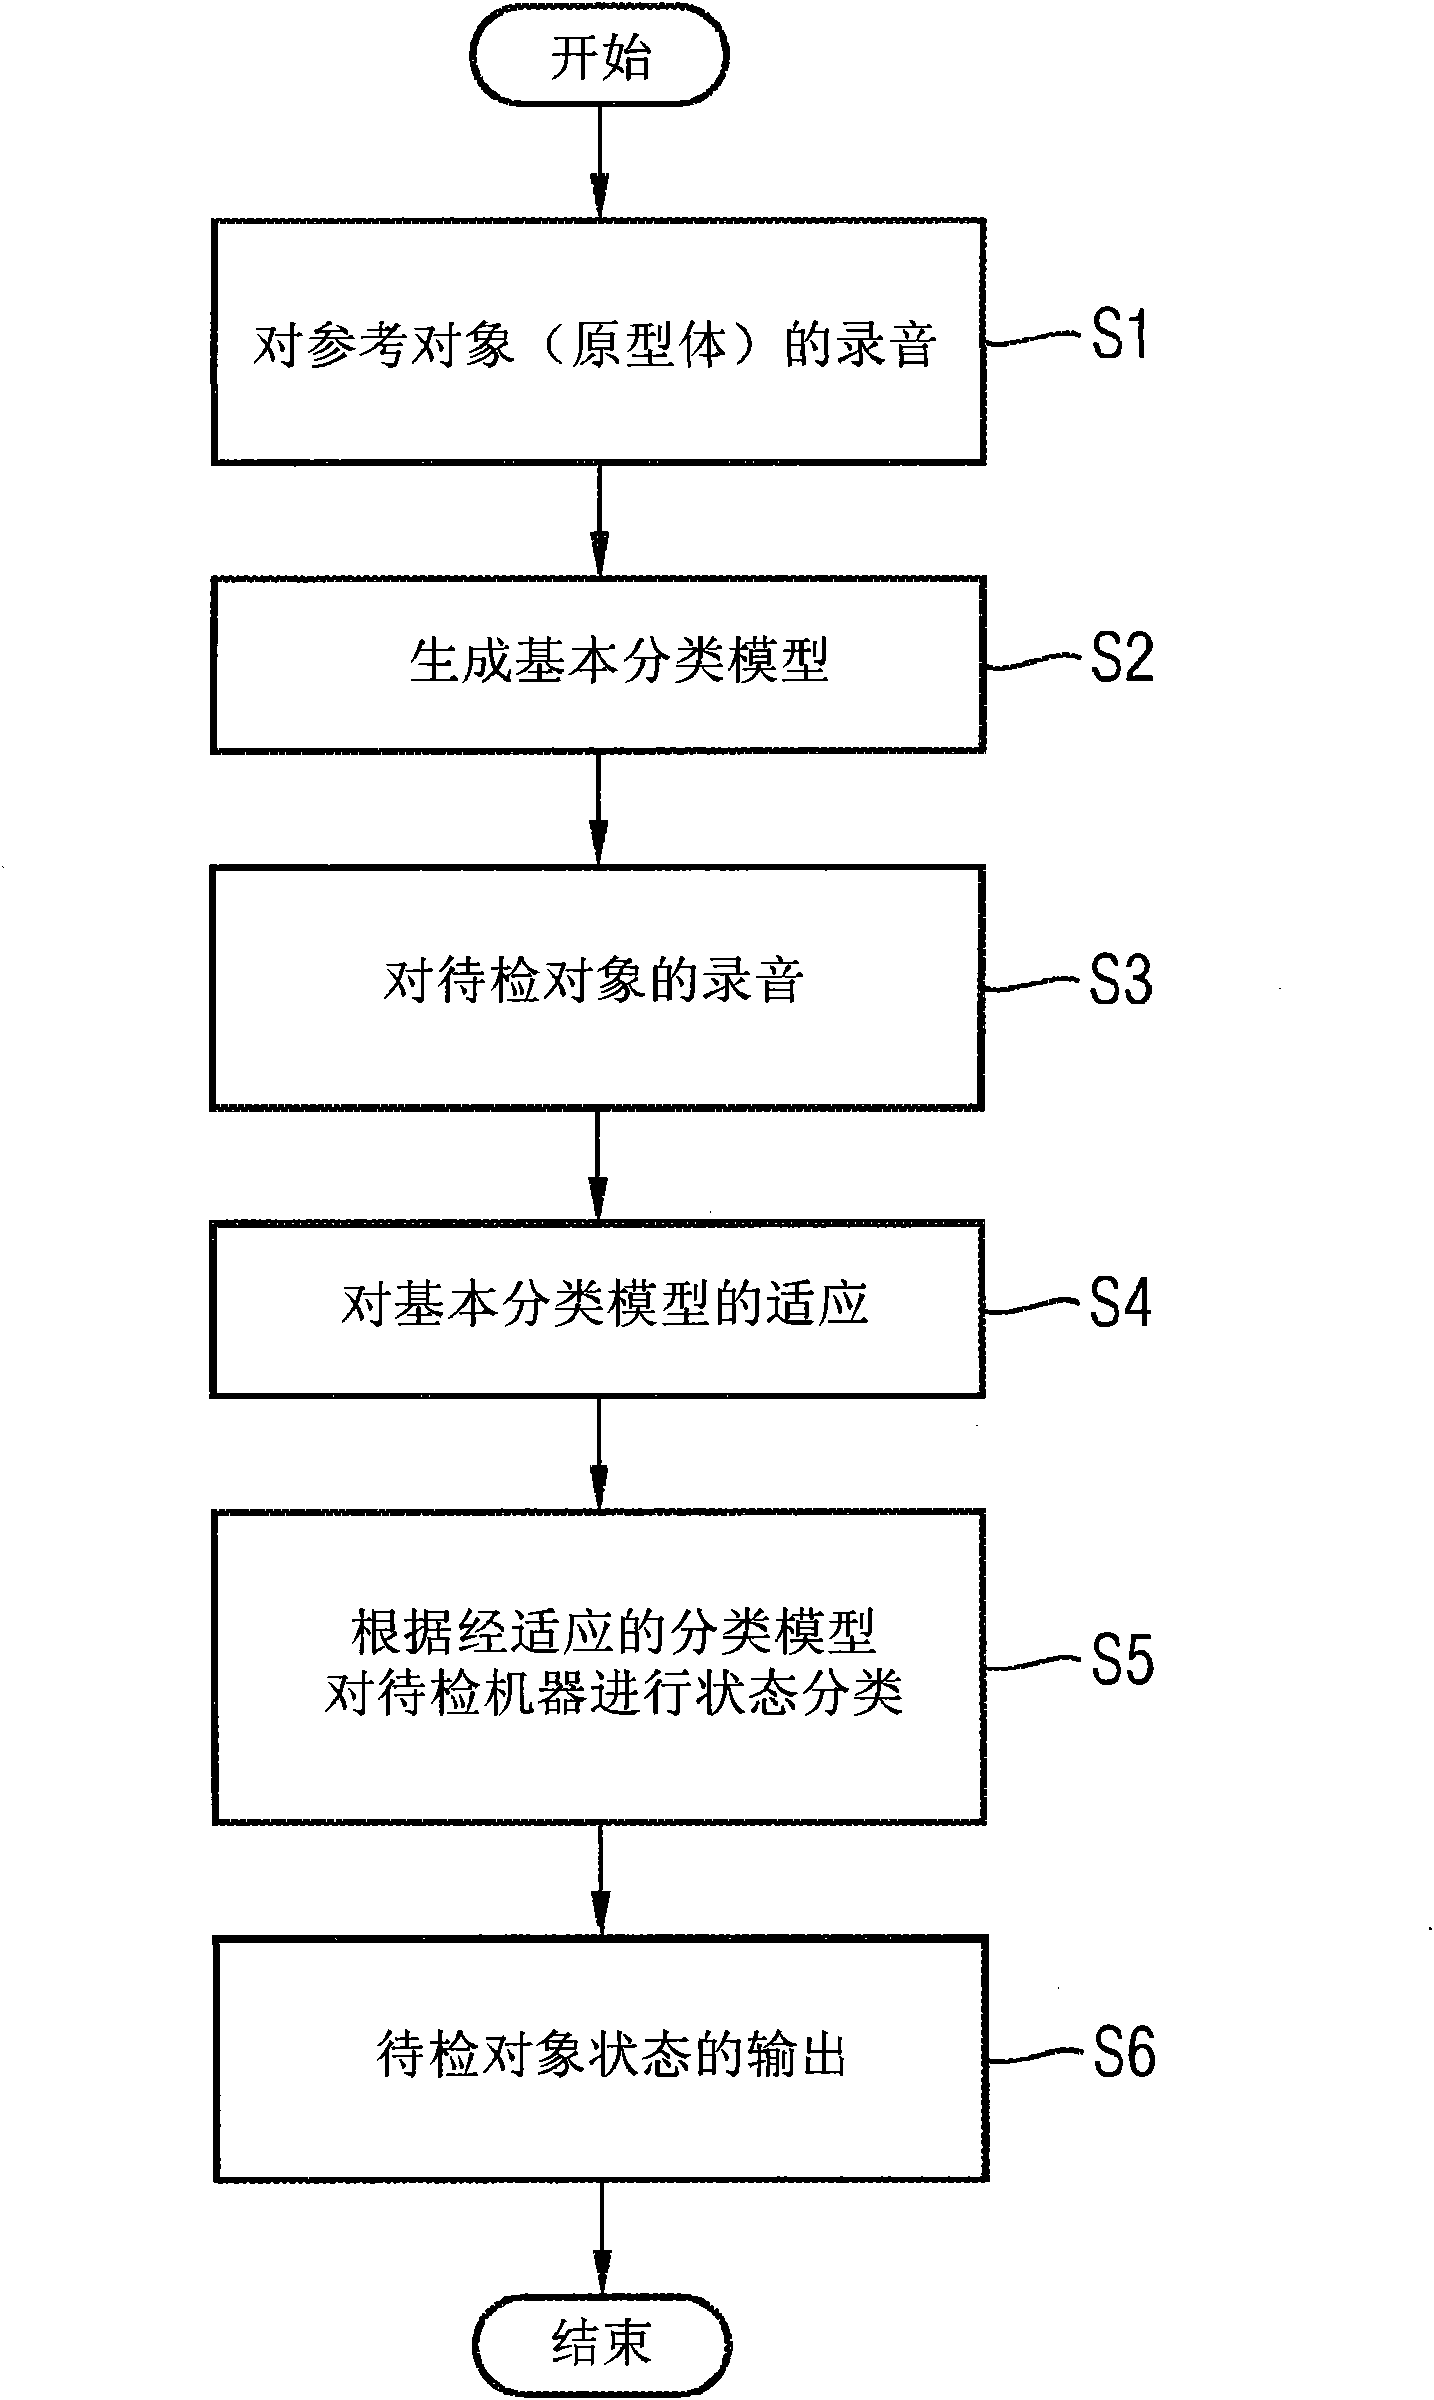 Method and device for recognizing a state of a noise-generating machine to be studied